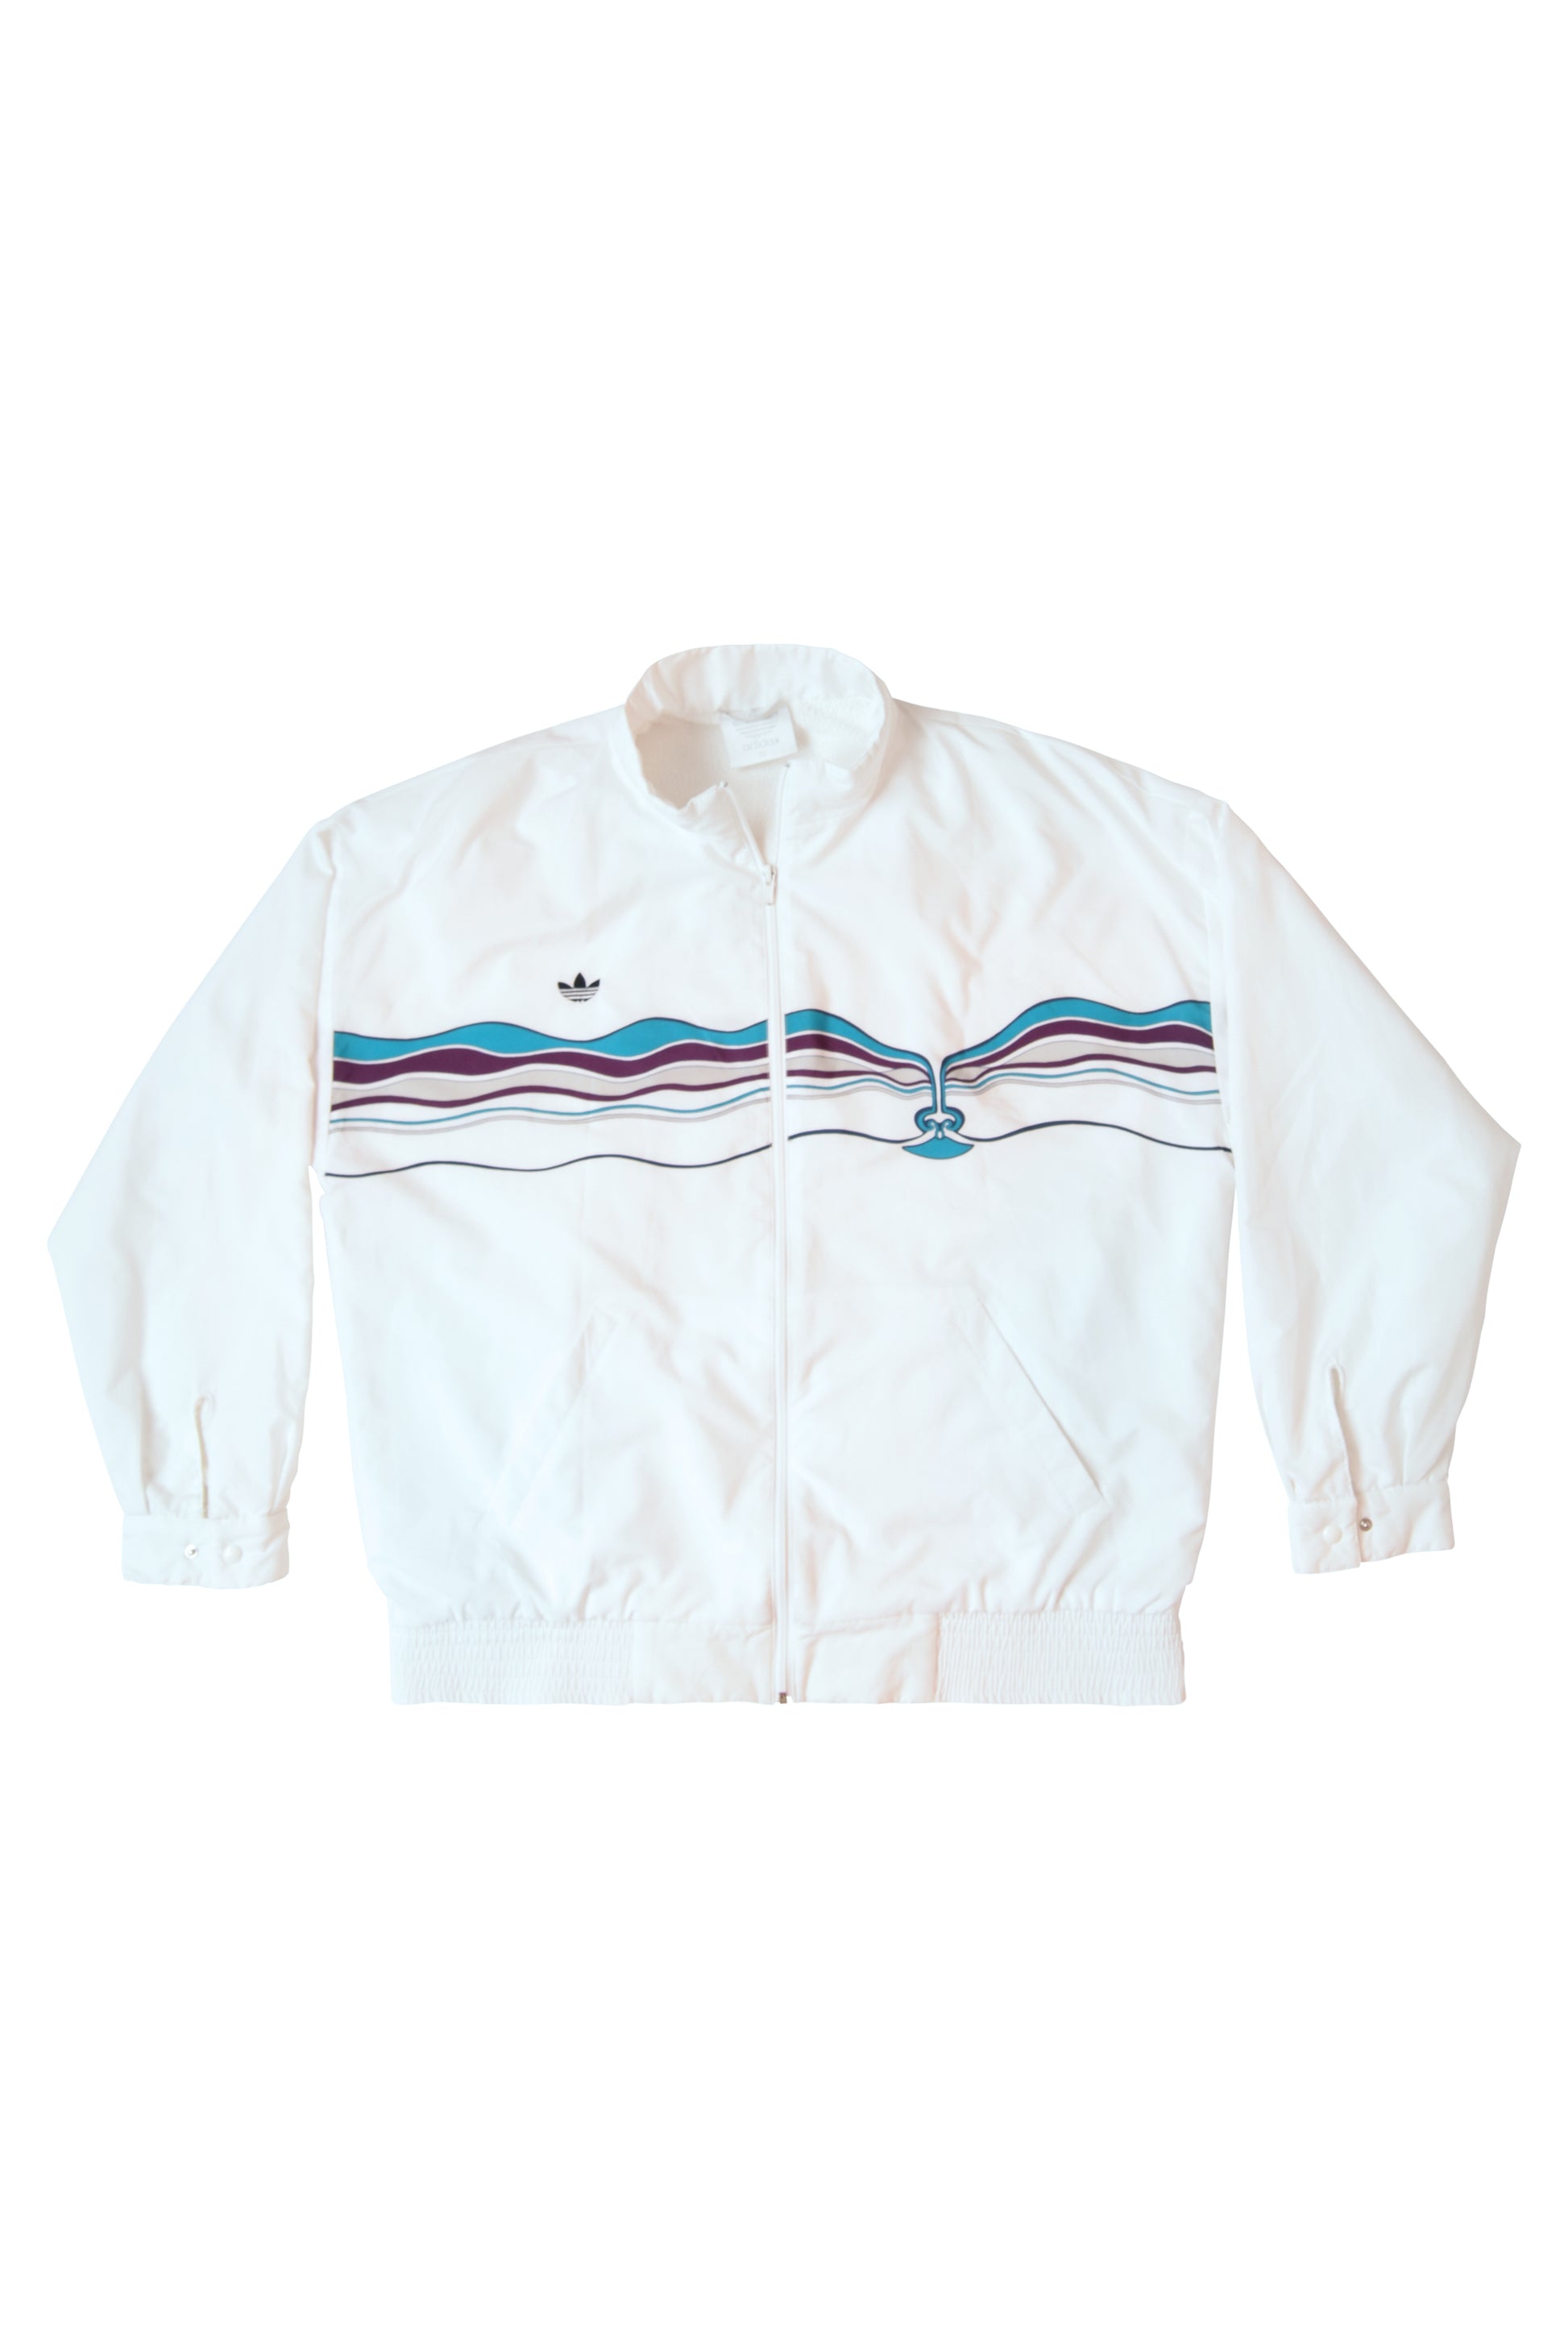 Vintage Adidas Ivan Lendl Jacket / Shell 80's Made in West Germany Size L